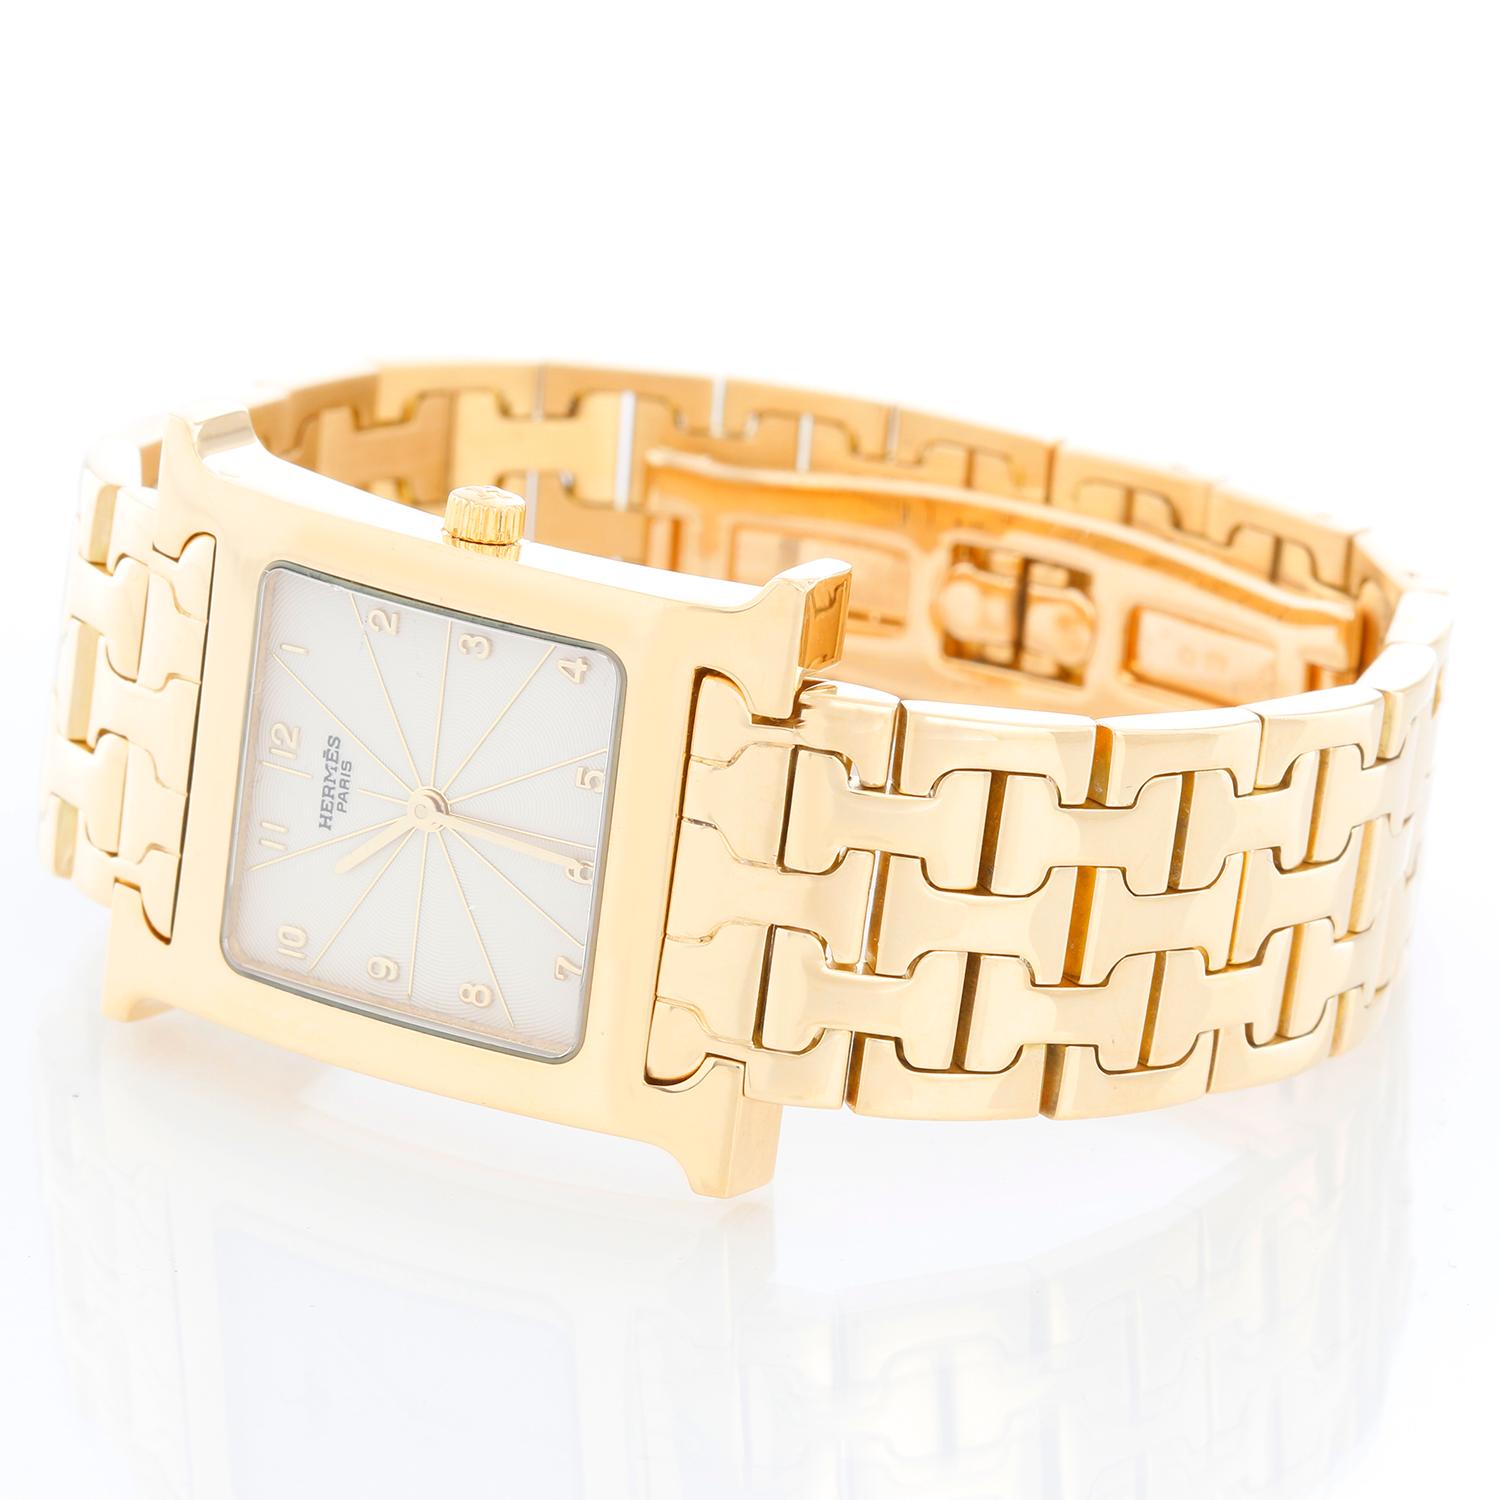 Hermes Heure H 18k Yellow Gold Ladies Watch HH1-585 - Quartz. 18K Yellow gold (26 mm x 35 mm ). White with Arabic numerals, sapphire crystal. 18K Yellow gold bracelet; will fit up to a 7 inch wrist . Pre-owned with custom box.